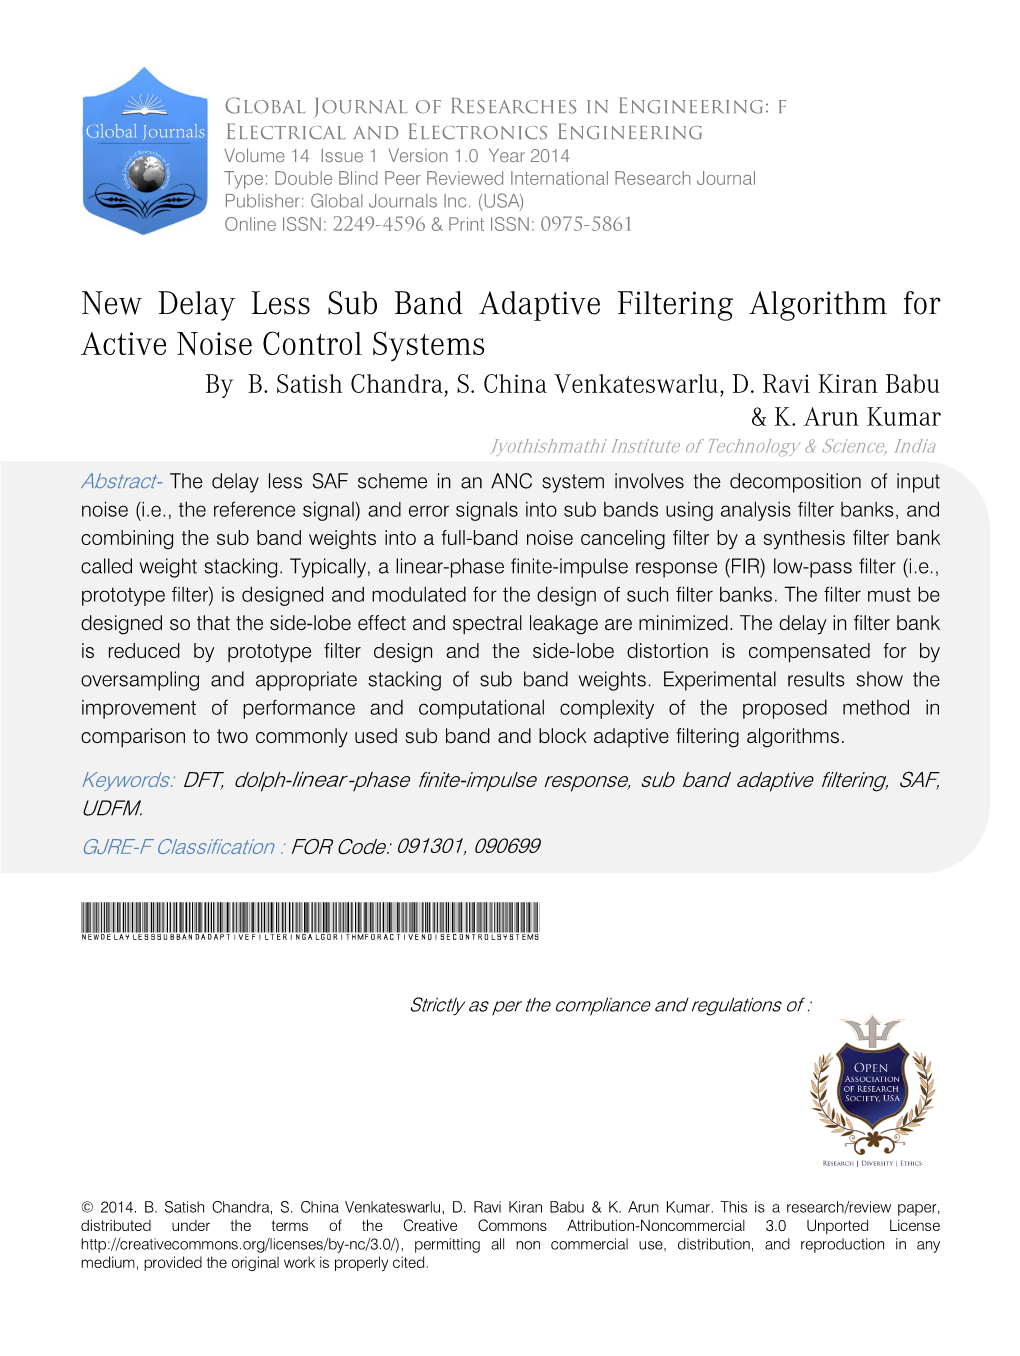 New Delay Less Sub Band Adaptive Filtering Algorithm Foractive Noise